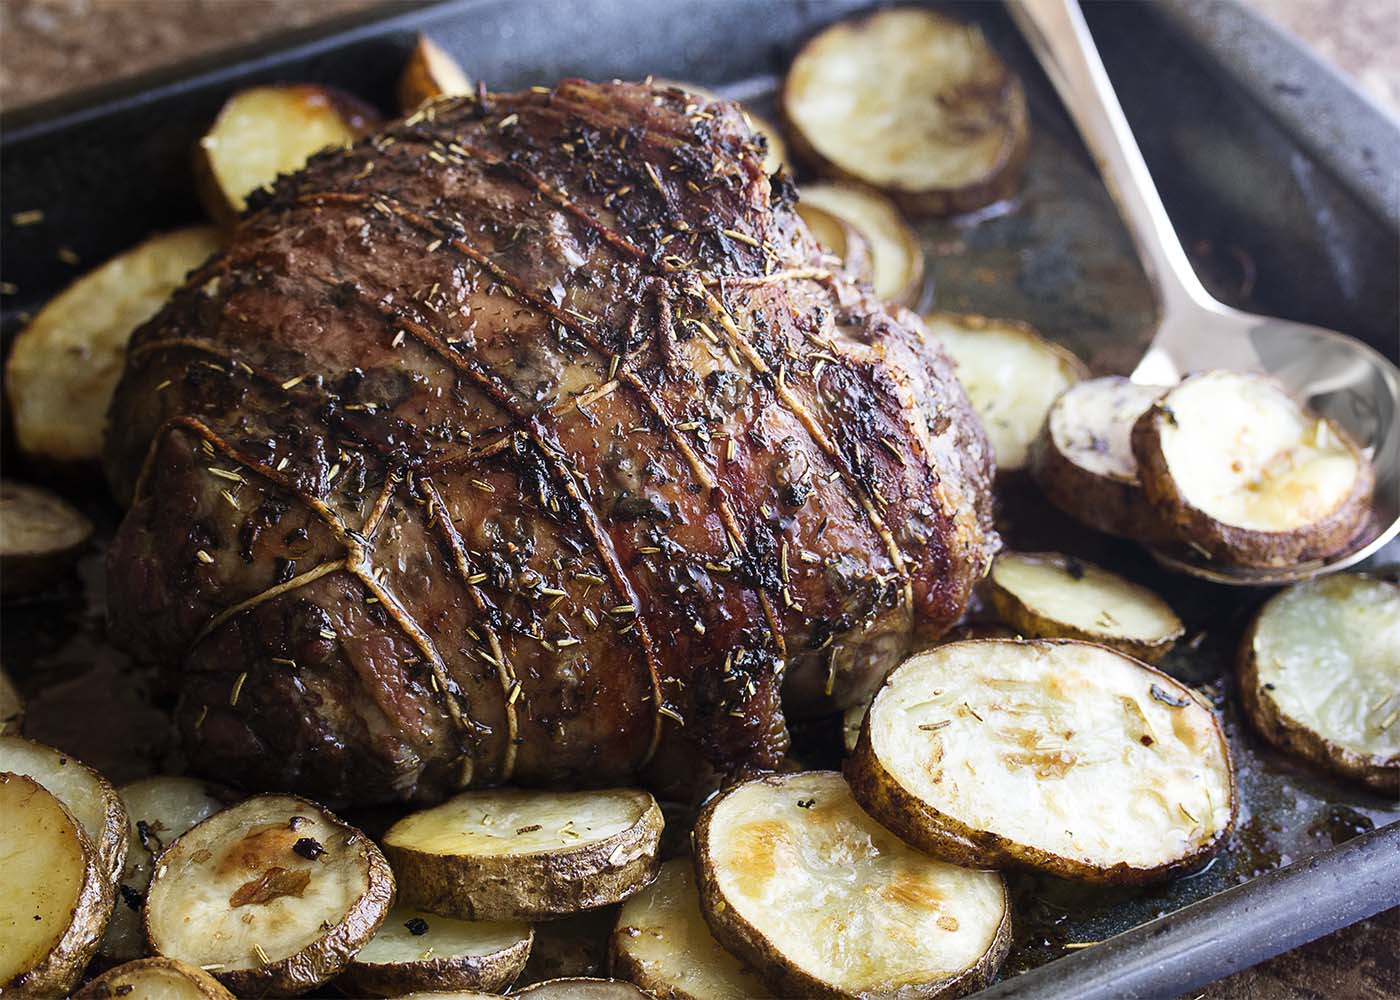 Keep the oven temperature low for a low-stress slow roasted Greek lamb leg which is tender and juicy and pink all the way through! Add some potatoes to the pan for a great, Greek-style meal. | justalittlebitofbacon.com